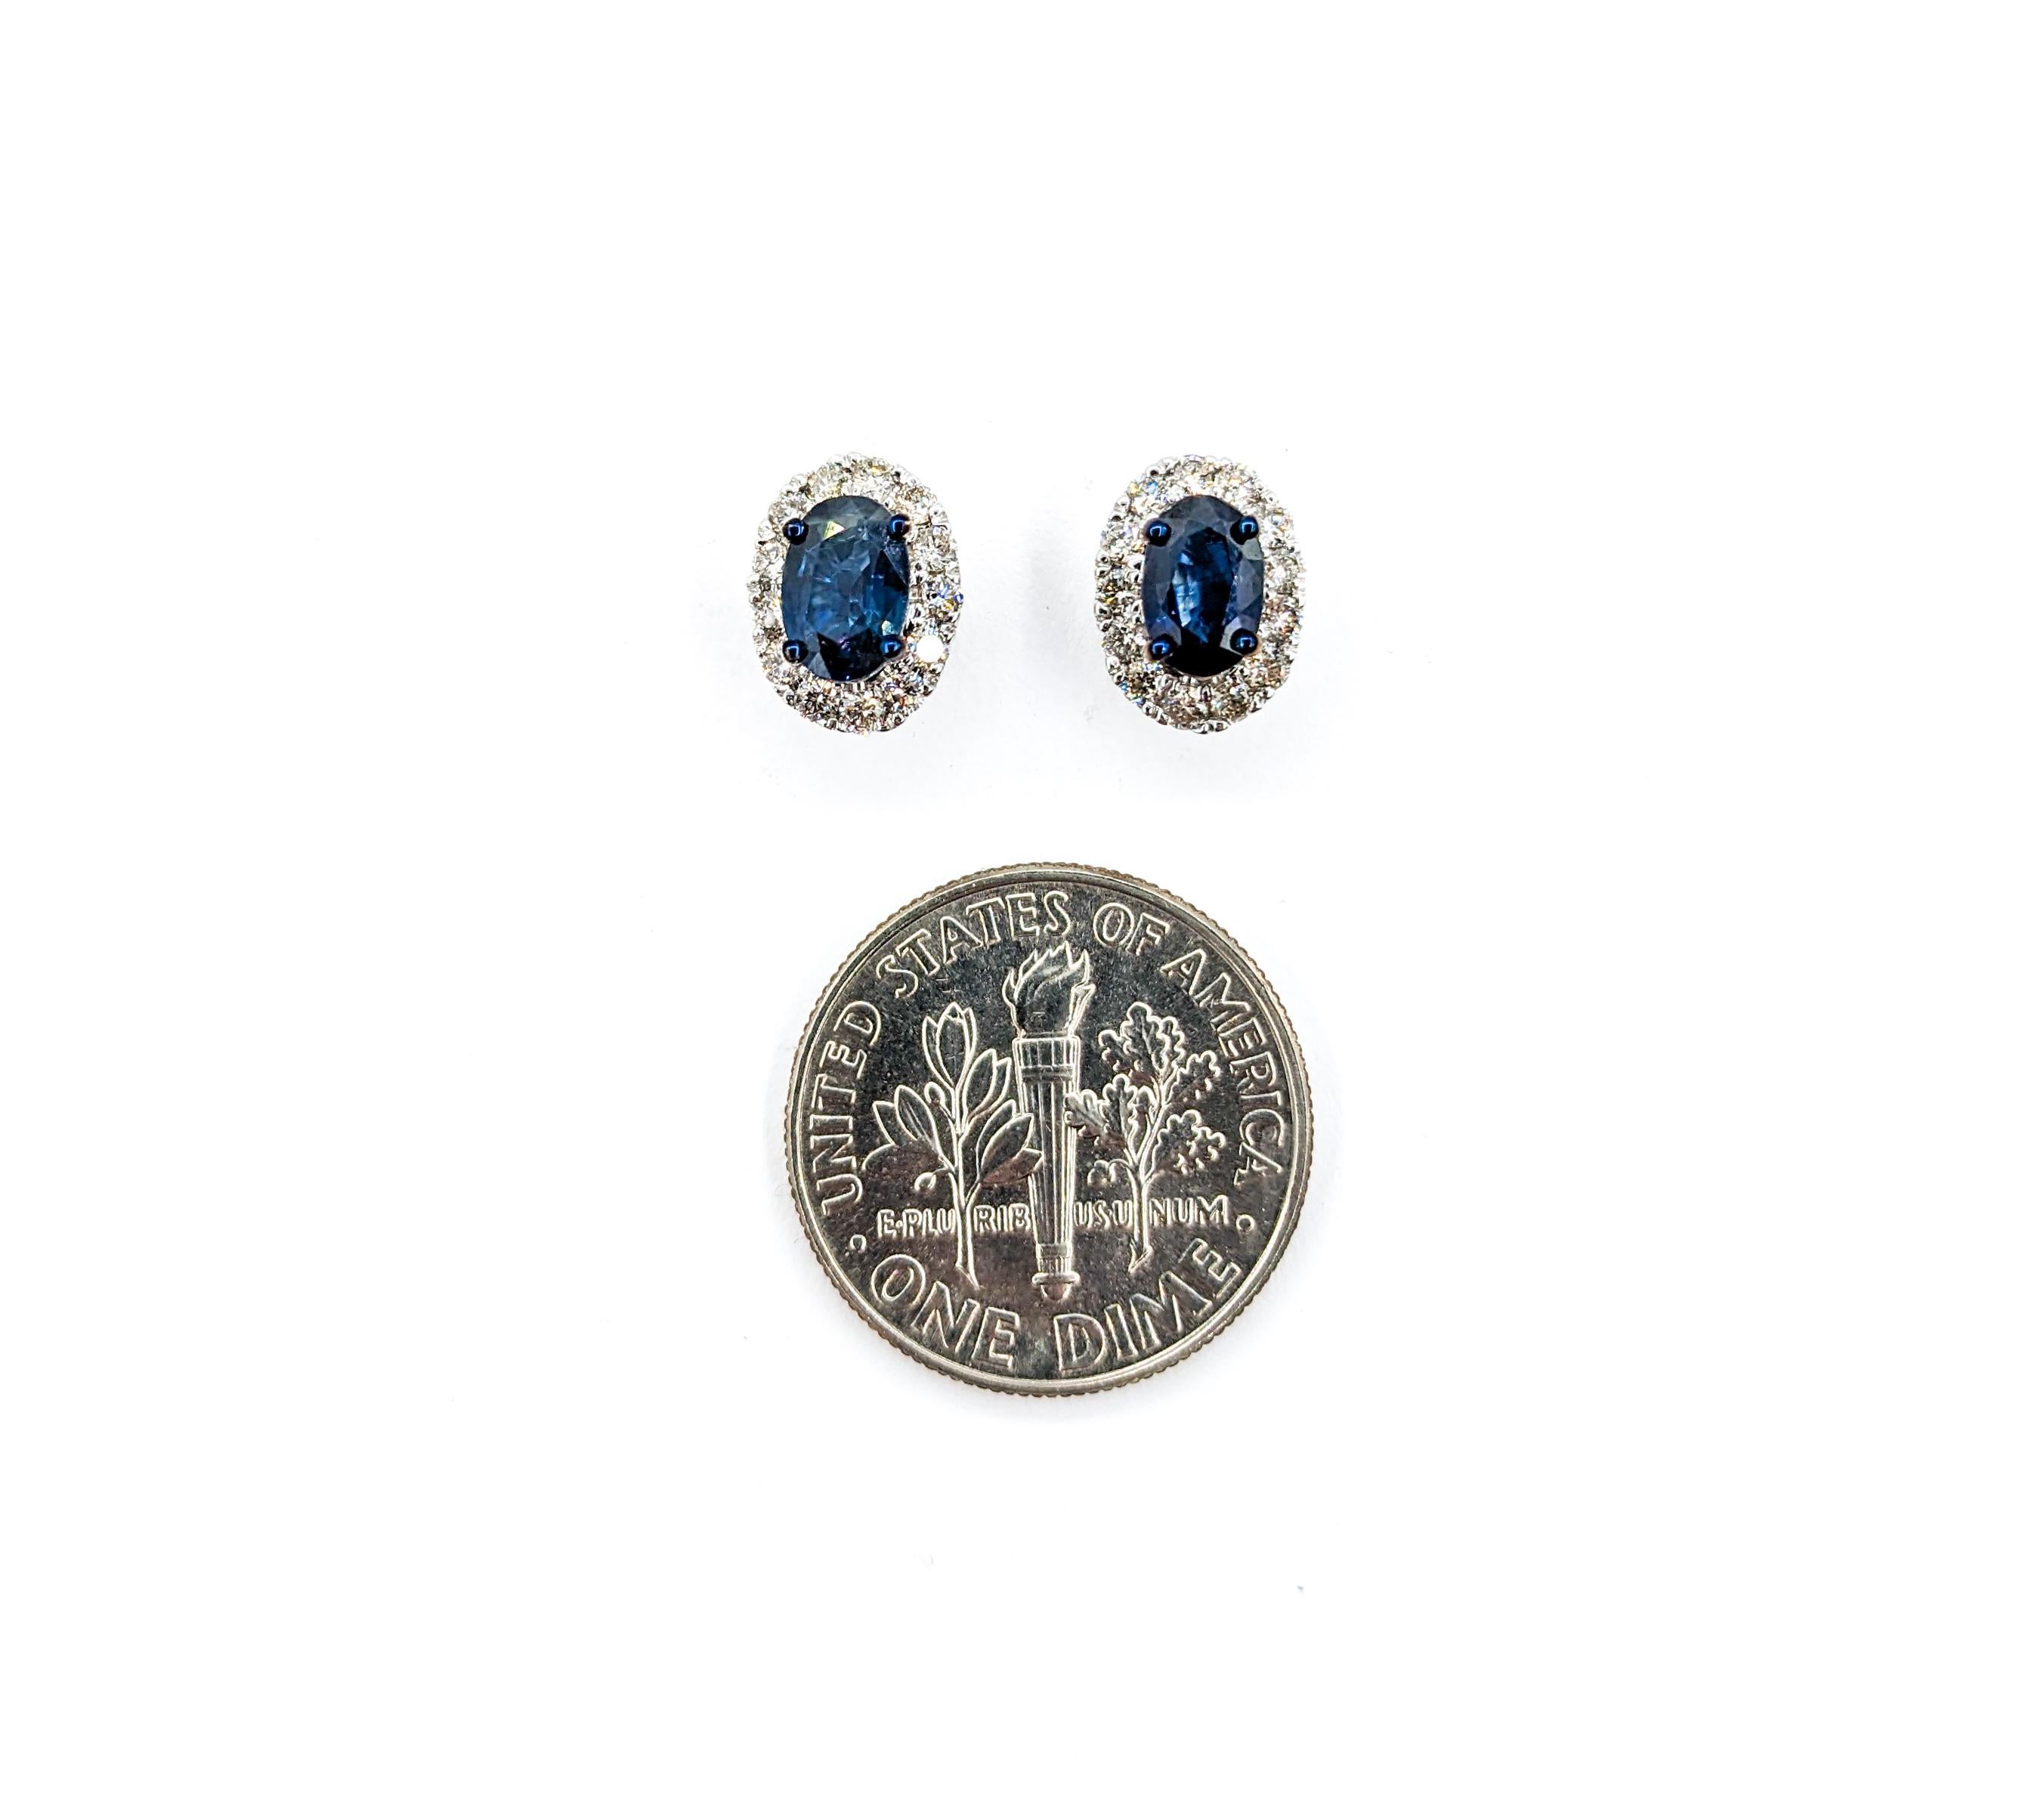 1.06ctw Sapphire & Diamond Earrings In White Gold

Presenting these stunning sapphire Earrings, meticulously crafted in 14k White Gold and featuring .38ctw Diamonds. These earrings boast 1.06ctw in Sapphires with a deep blue color. The brilliant